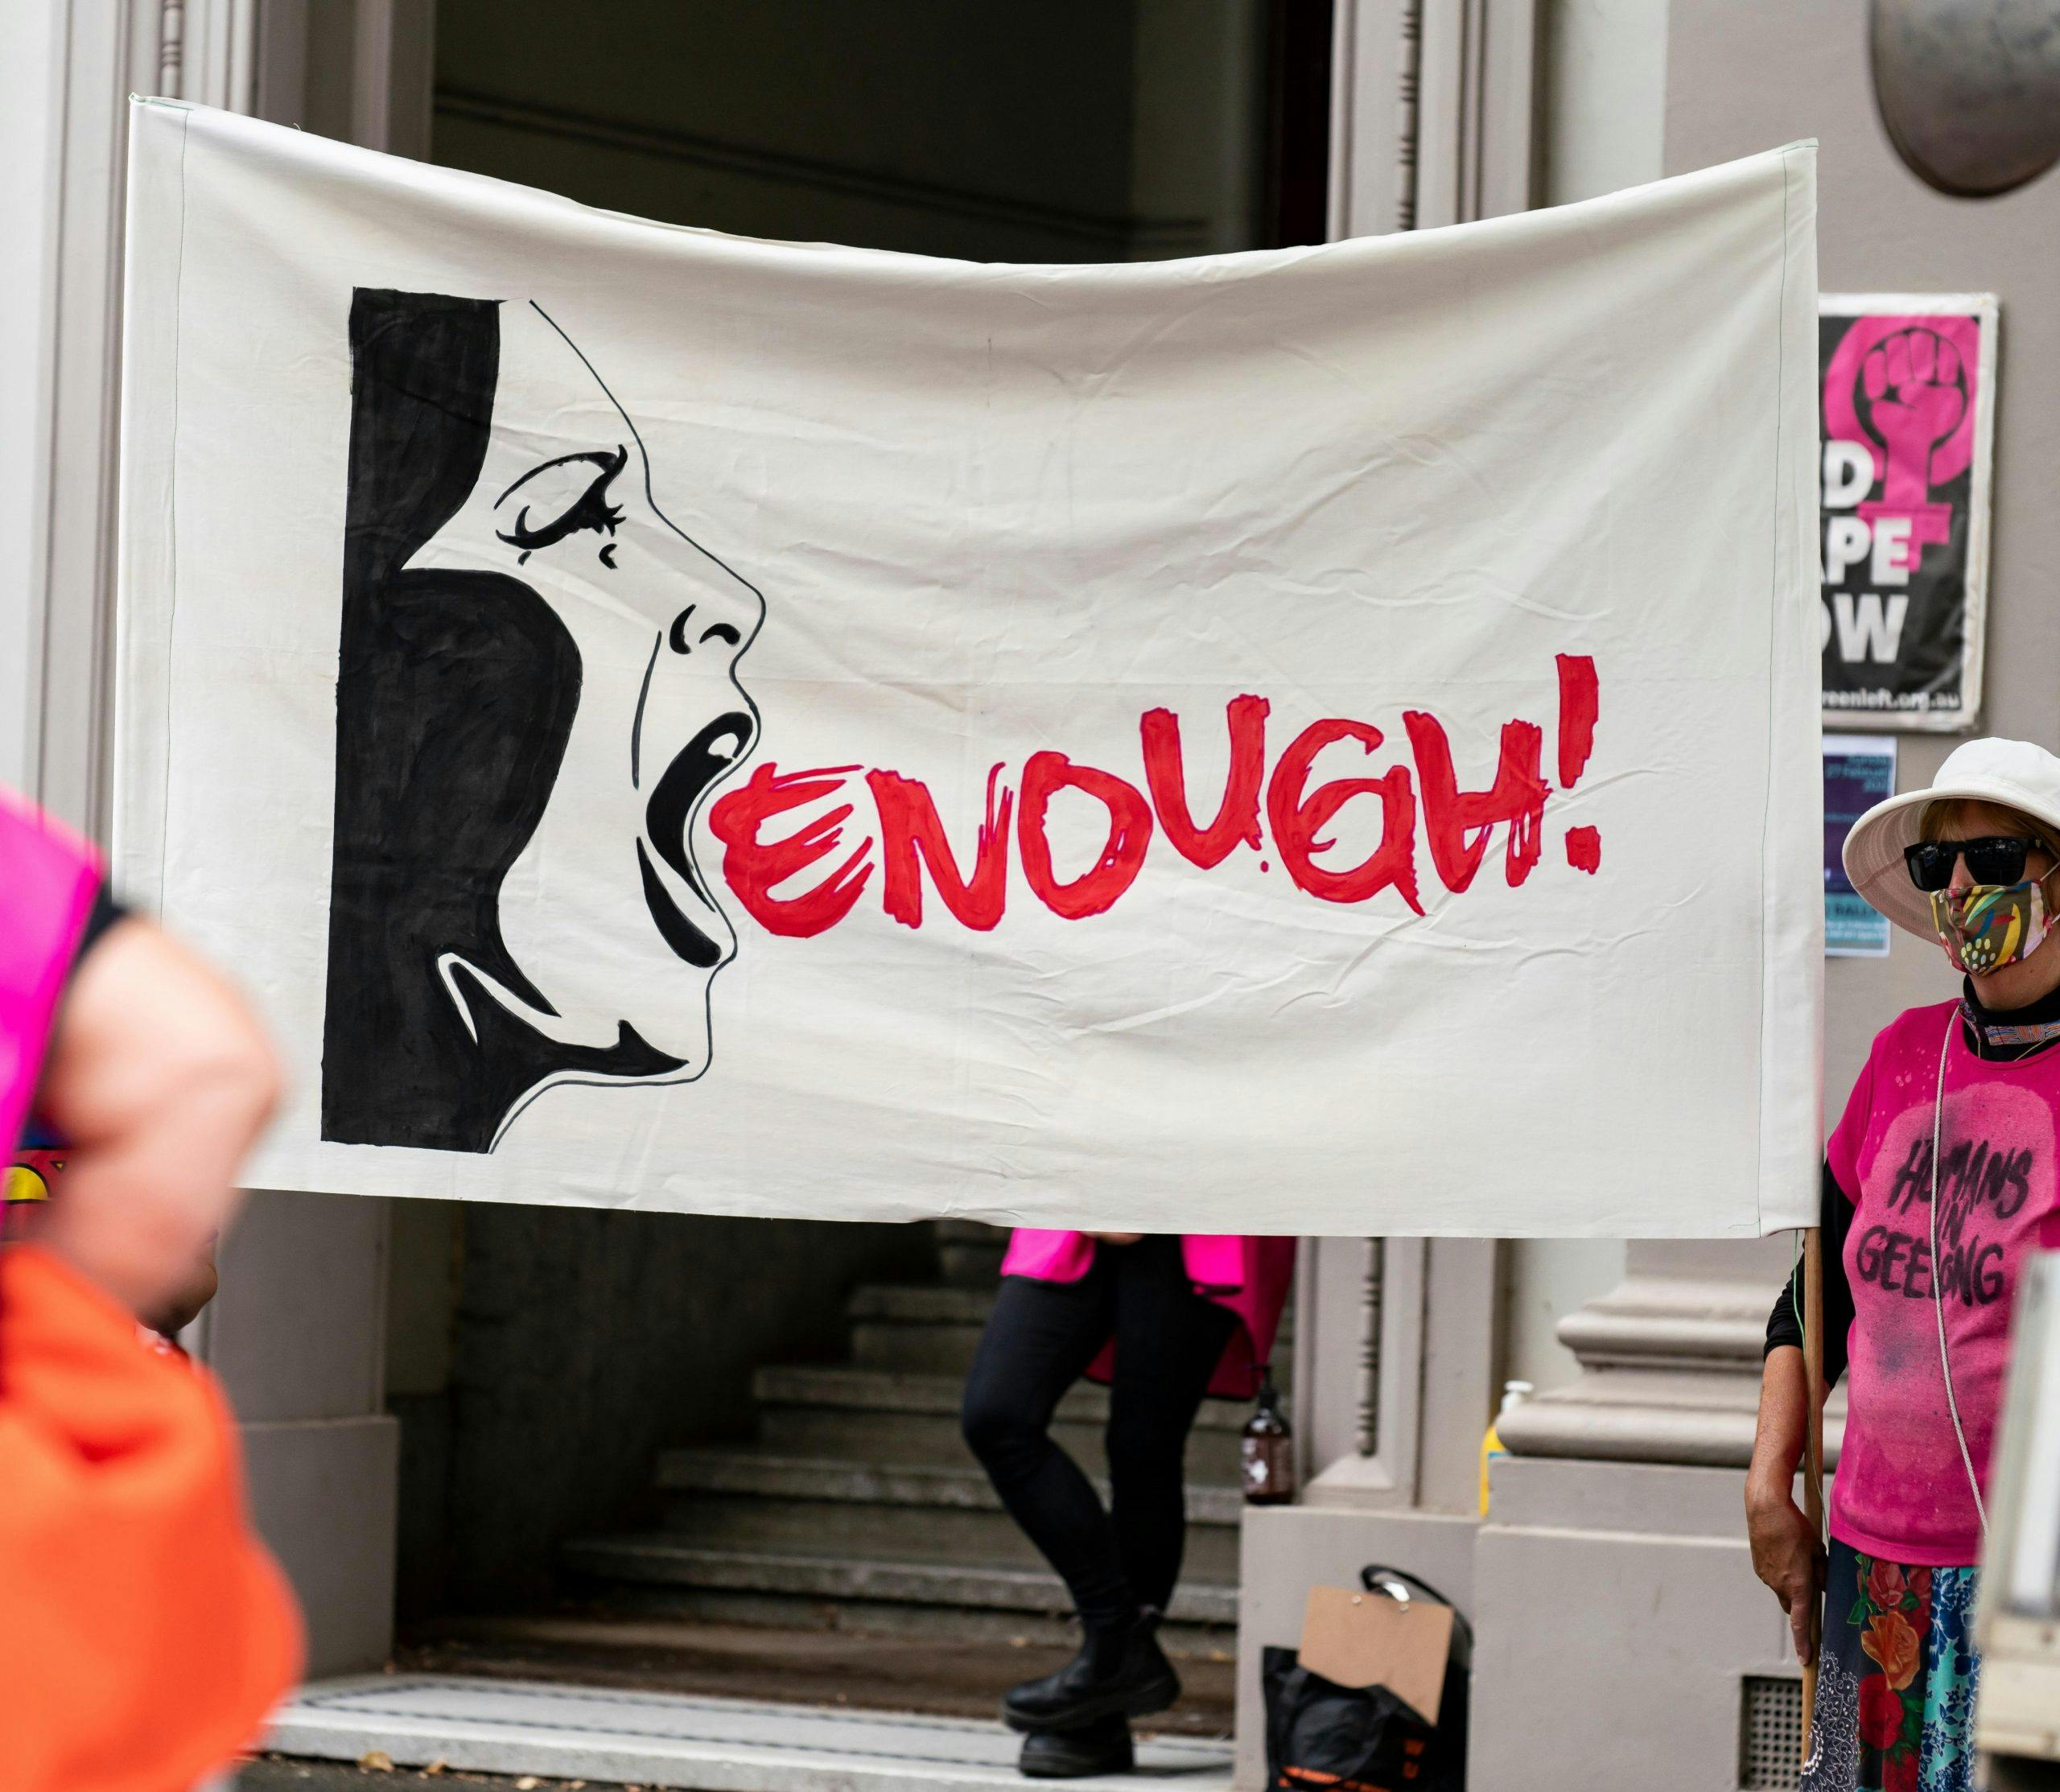 Photo of a banner from a Geelong women's rights protest which reads ENOUGH!.. The text is positioned coming out from a graphic illustration of a woman's profile shouting.